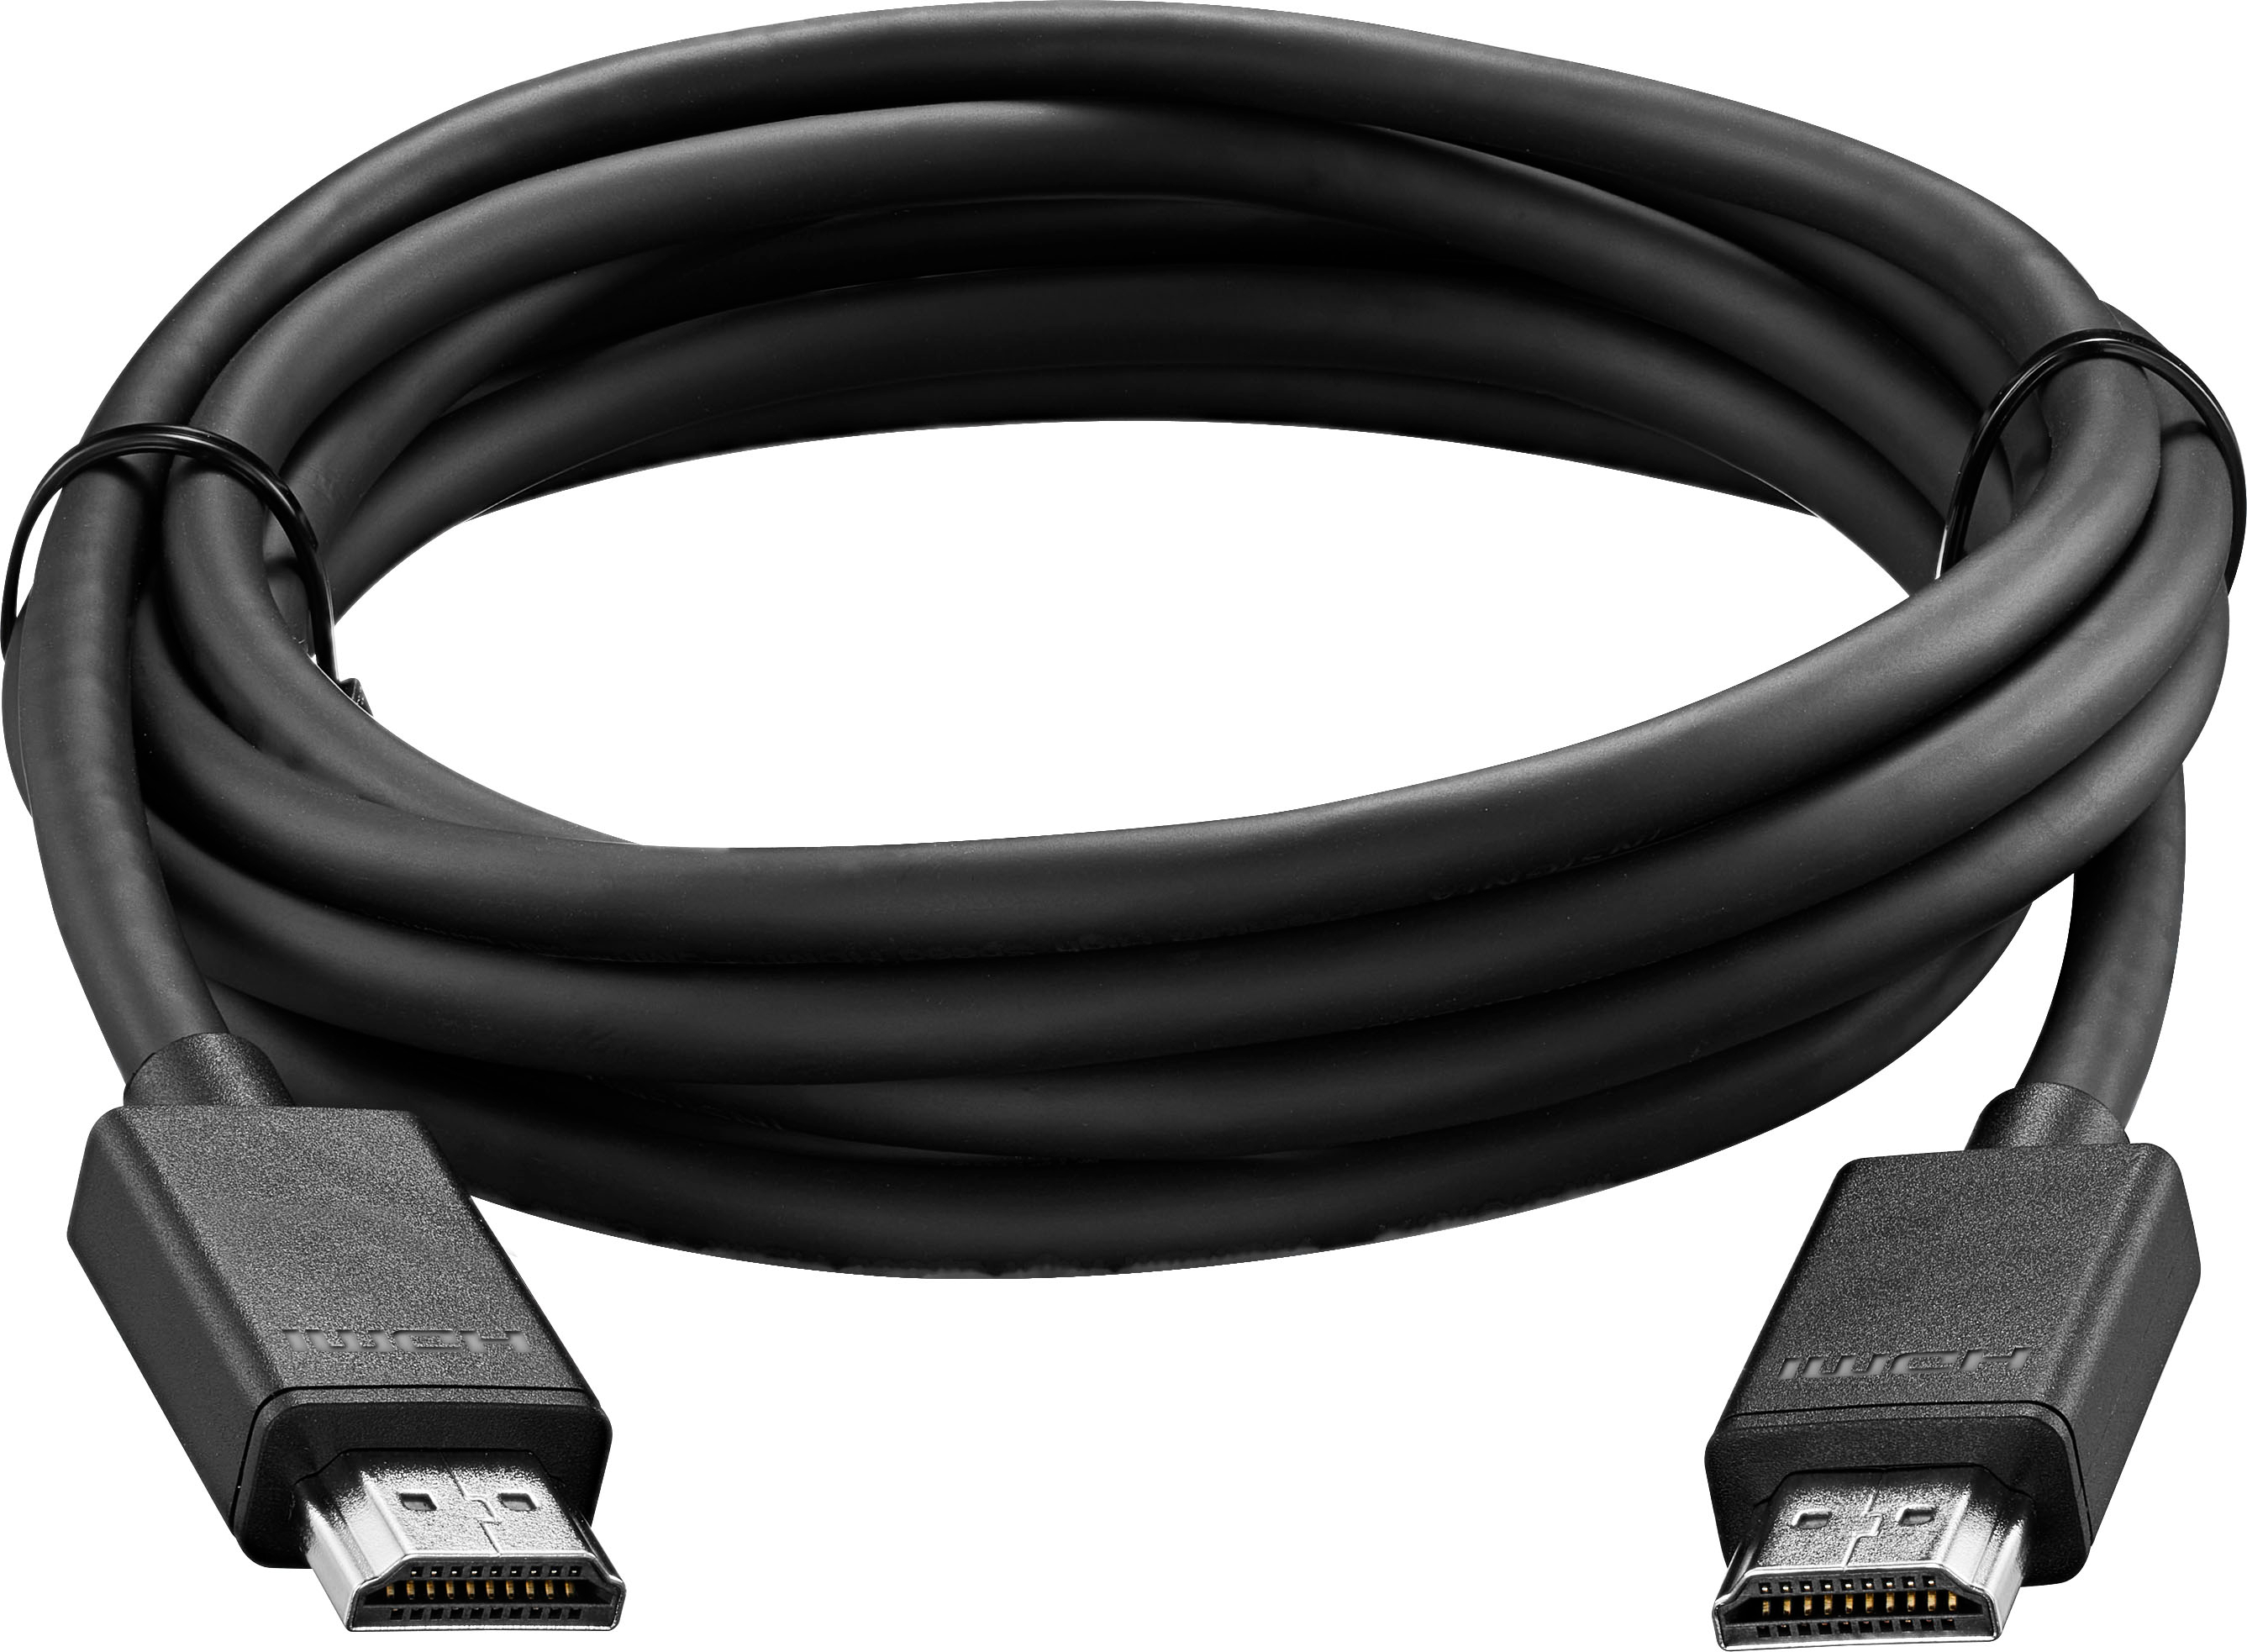 Insignia™ 8' Micro HDMI Cable to HDMI Black NS-PG08591 - Best